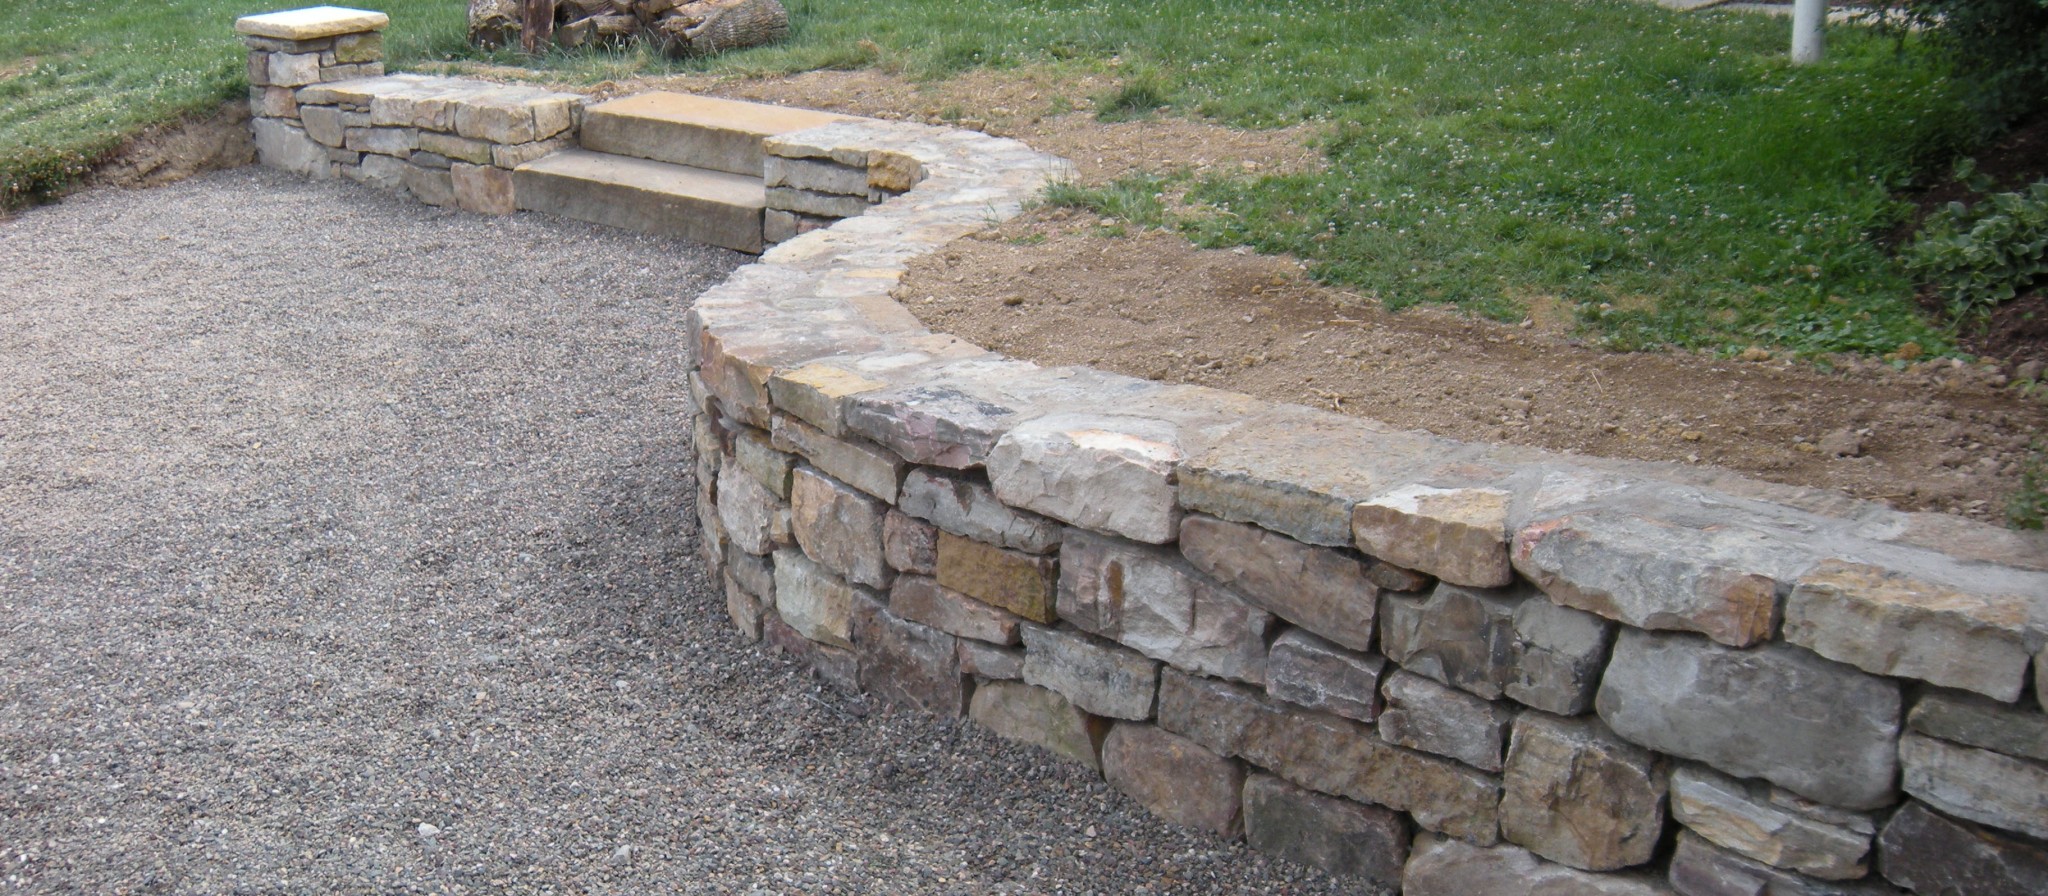 A mountain stone retaining wall at the Snyder residence in Richfield, PA.